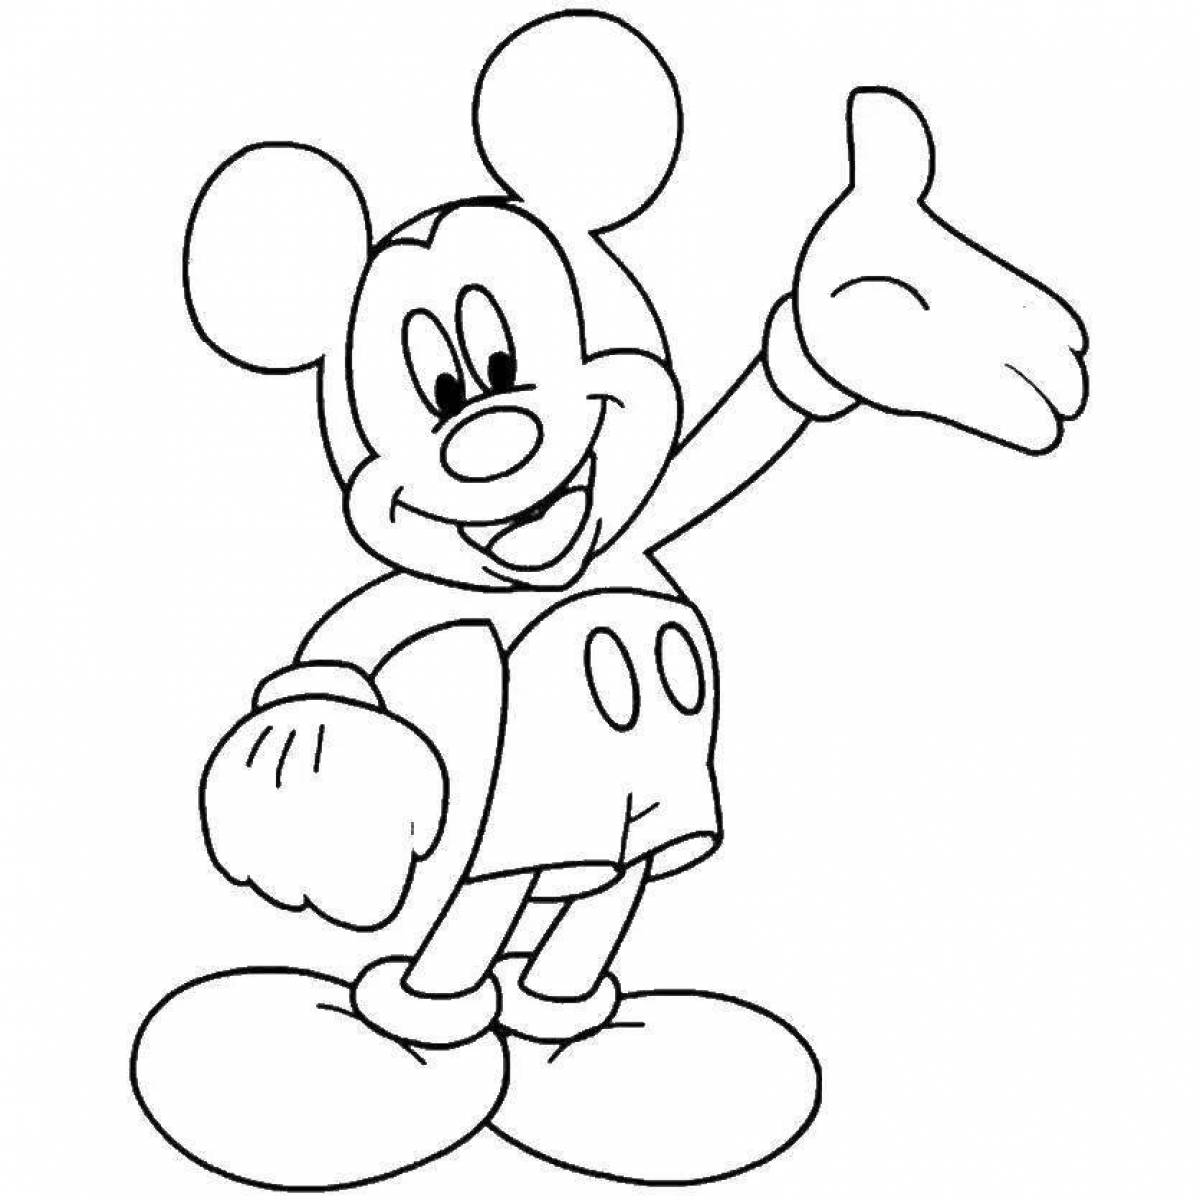 Charming cartoon mouse coloring book